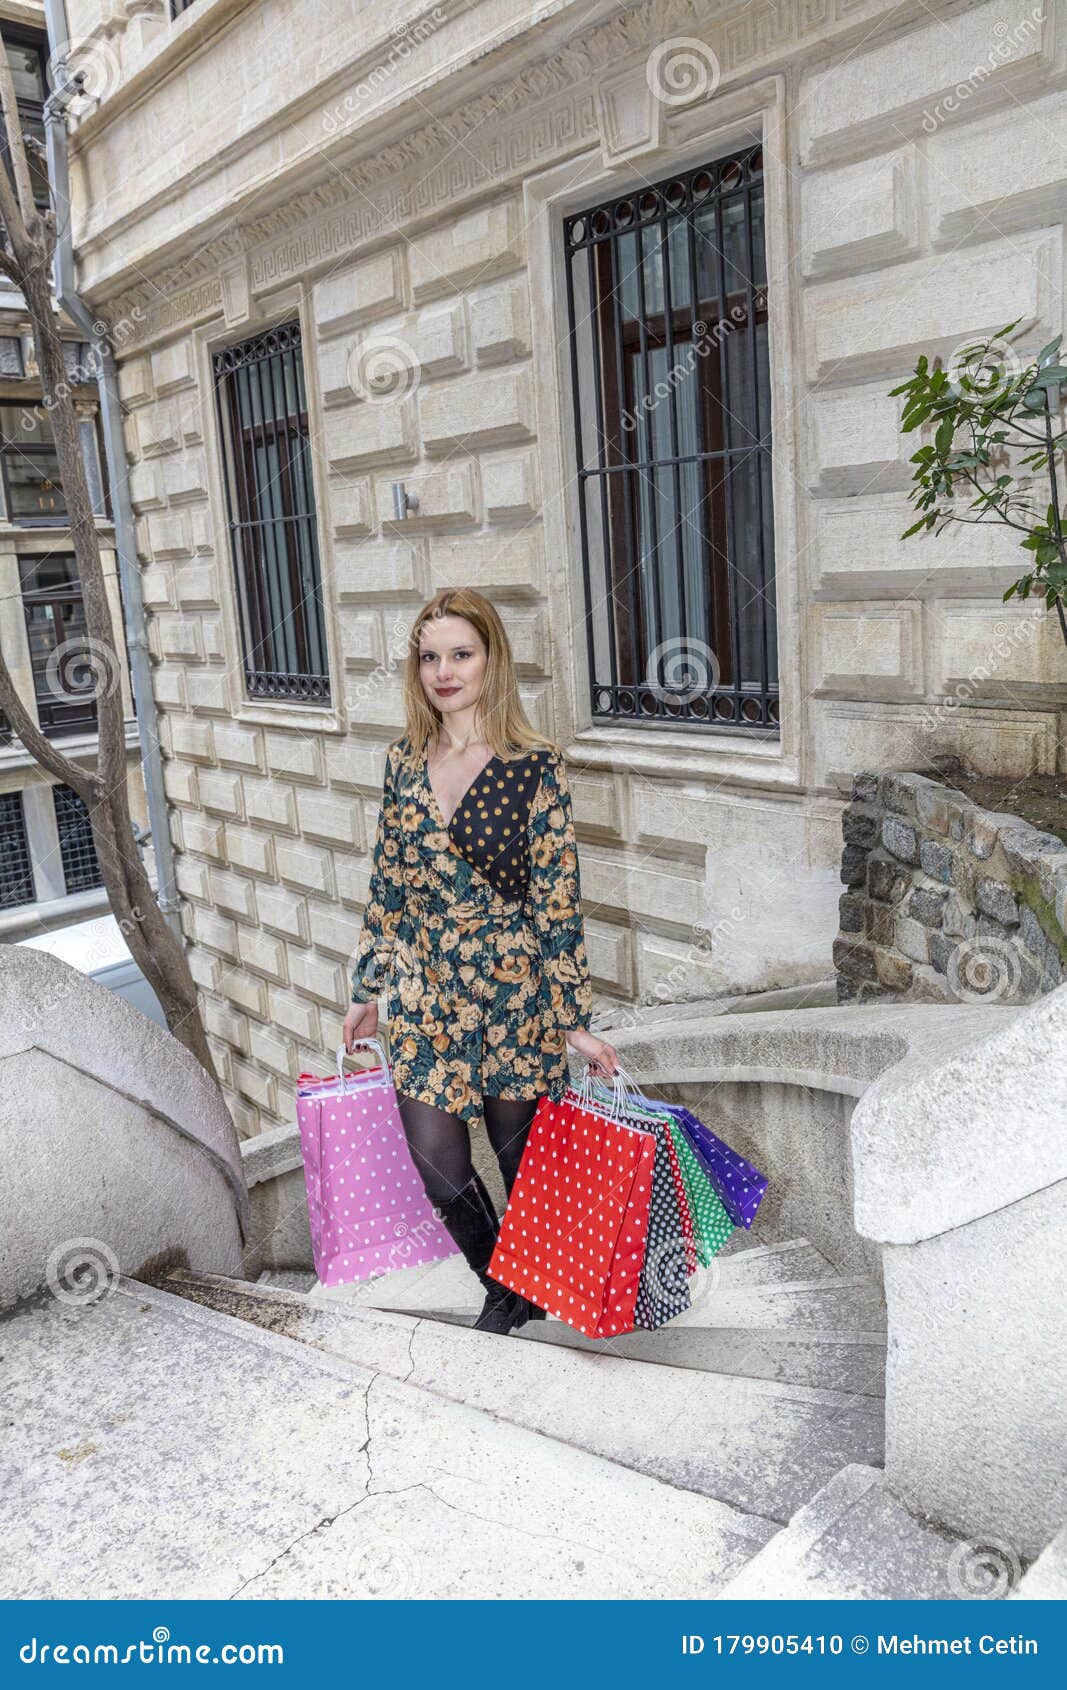 young woman holding colorful shopping bag with a happy smile. camondo stairs turkish: kamondo merdivenleri in galata district in